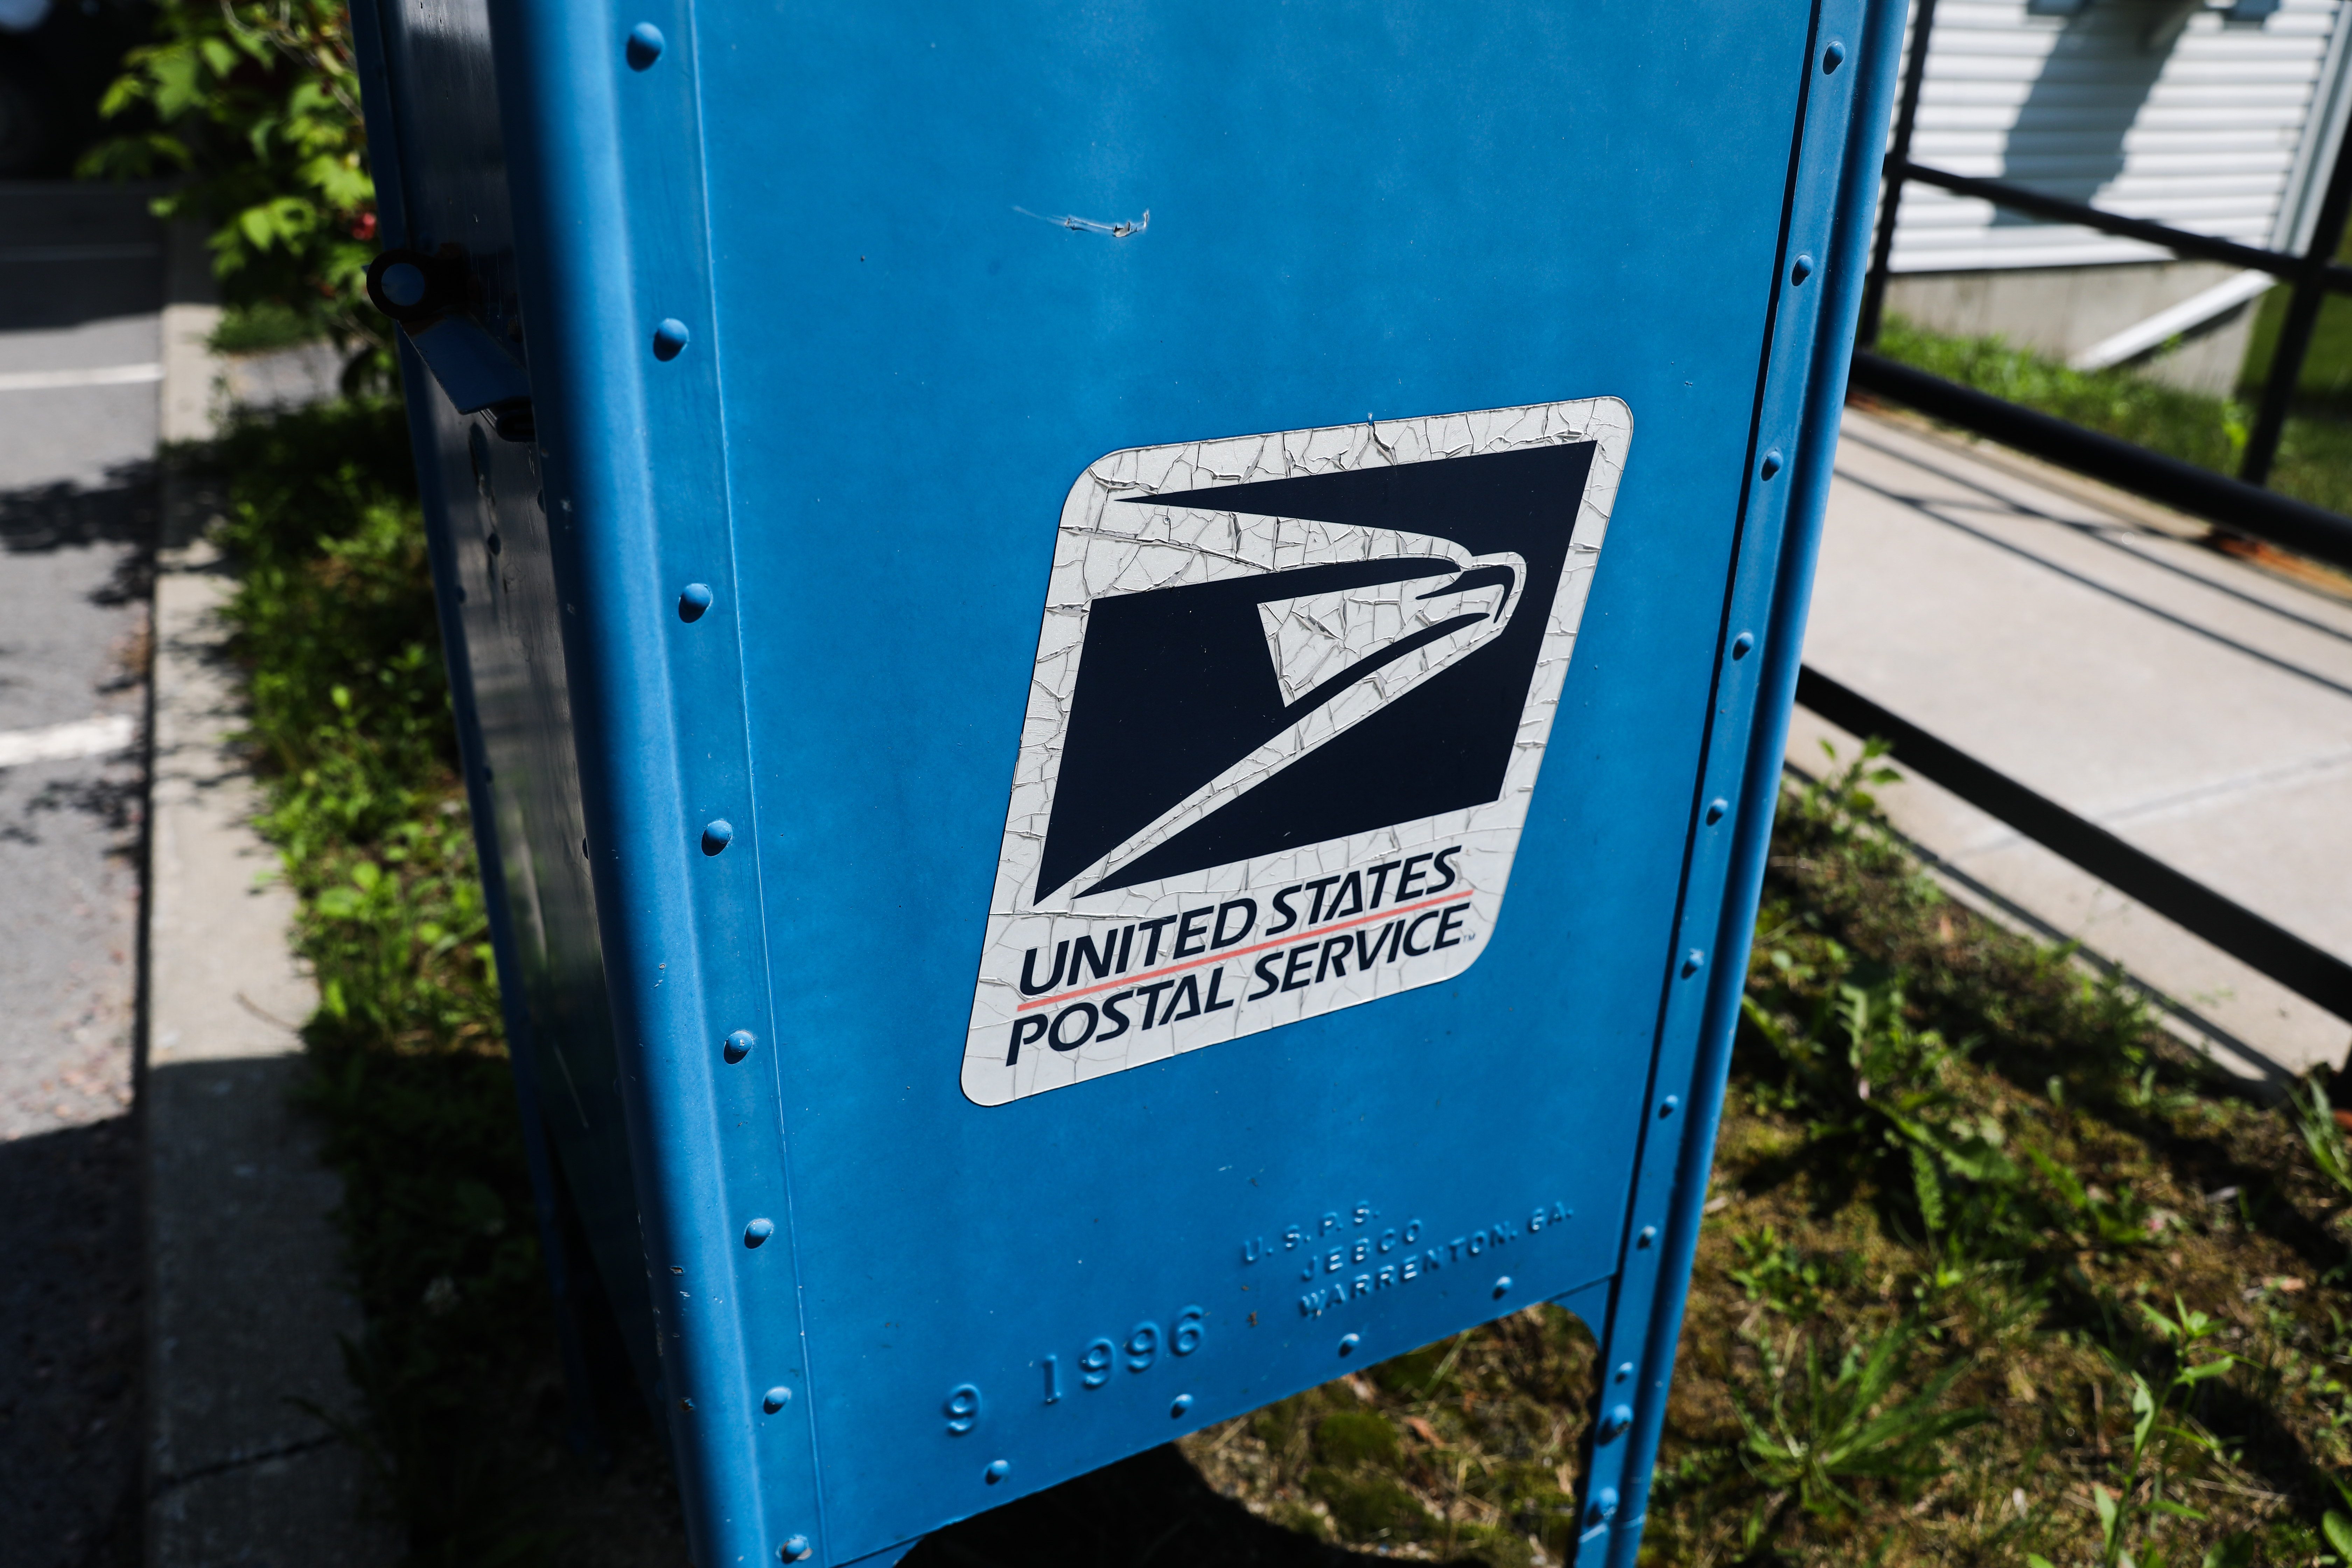 Columbus Day: Is USPS open? Are banks closed? Here's what you need to know.  - MarketWatch